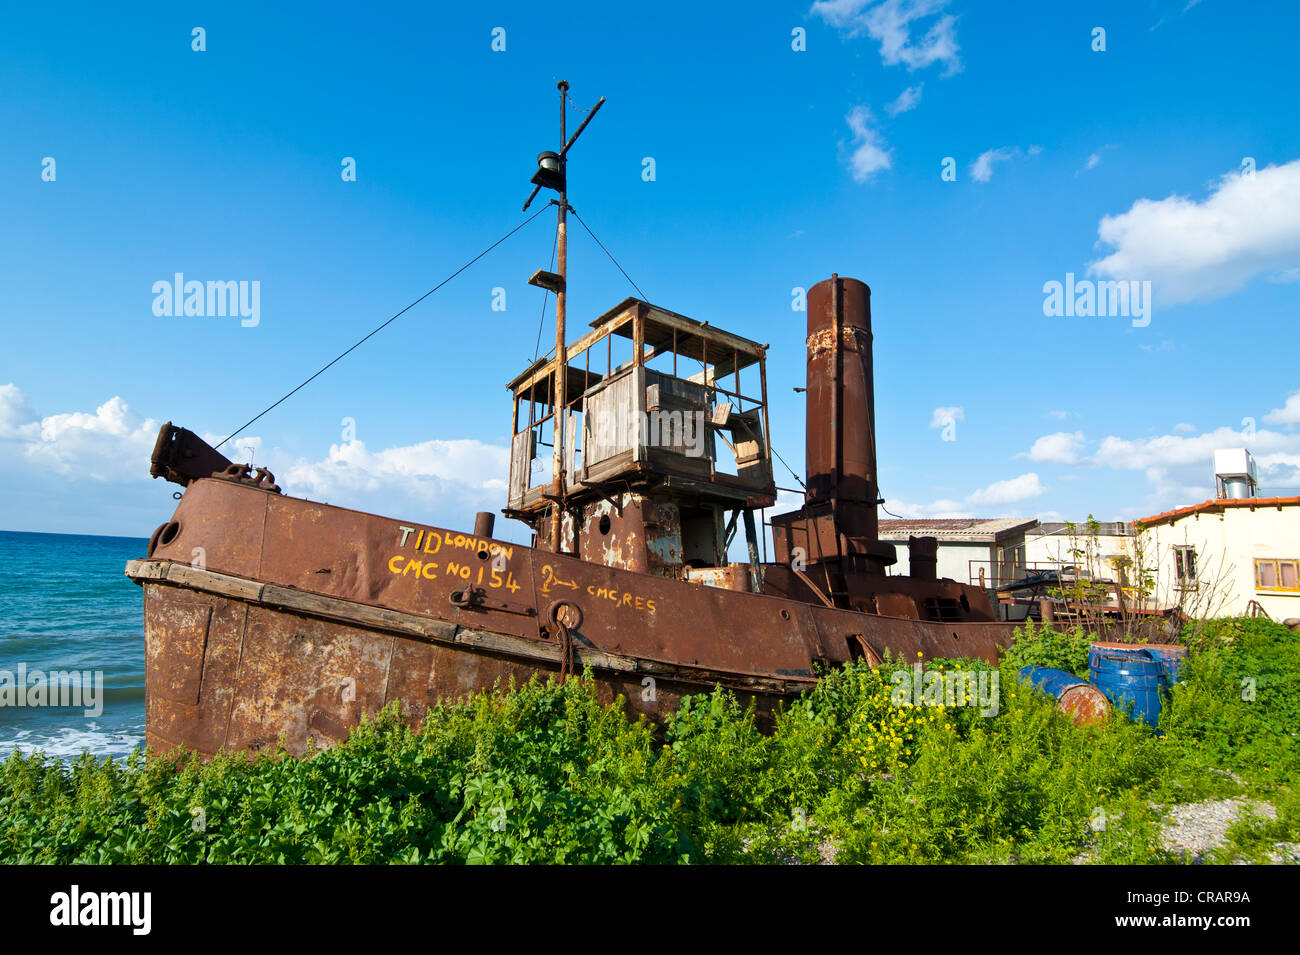 Old rusty steam boat, Turkish part of Cyprus Stock Photo